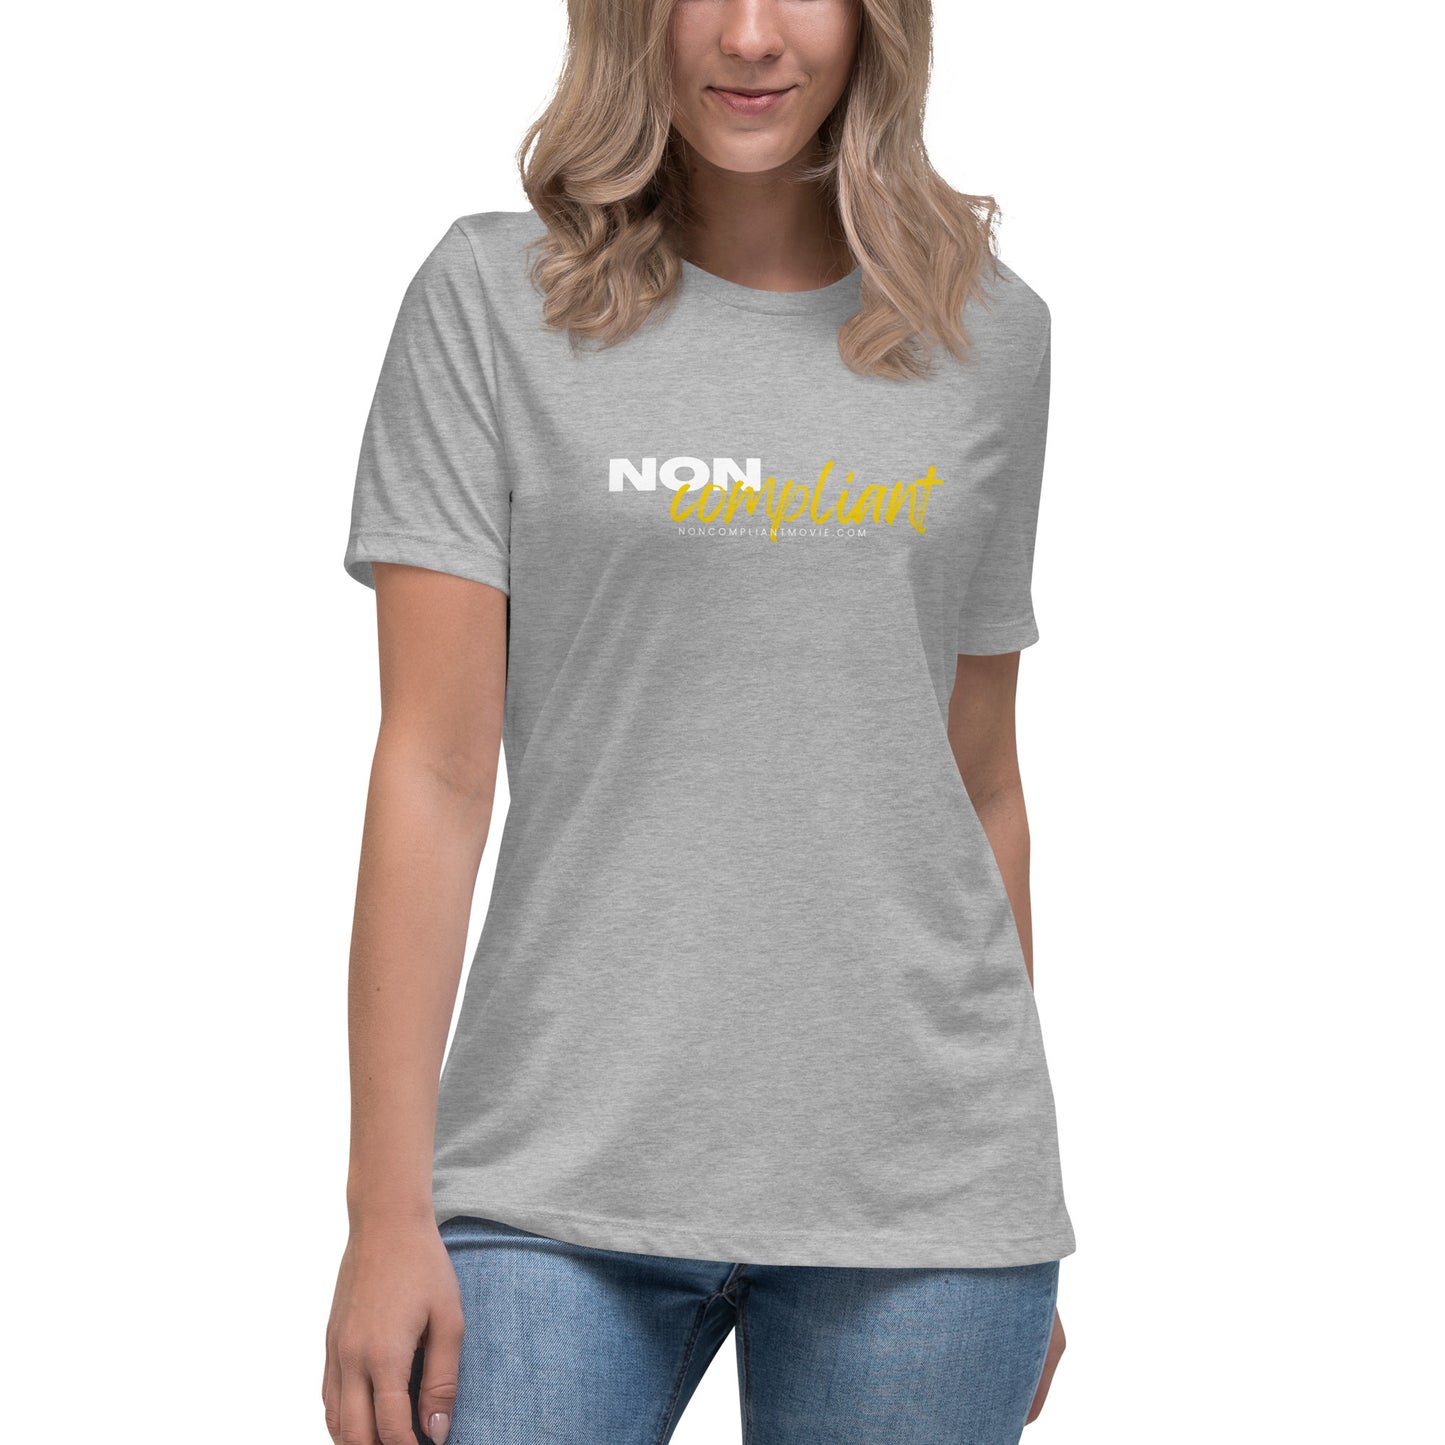 Noncompliant Women's Relaxed T-Shirt